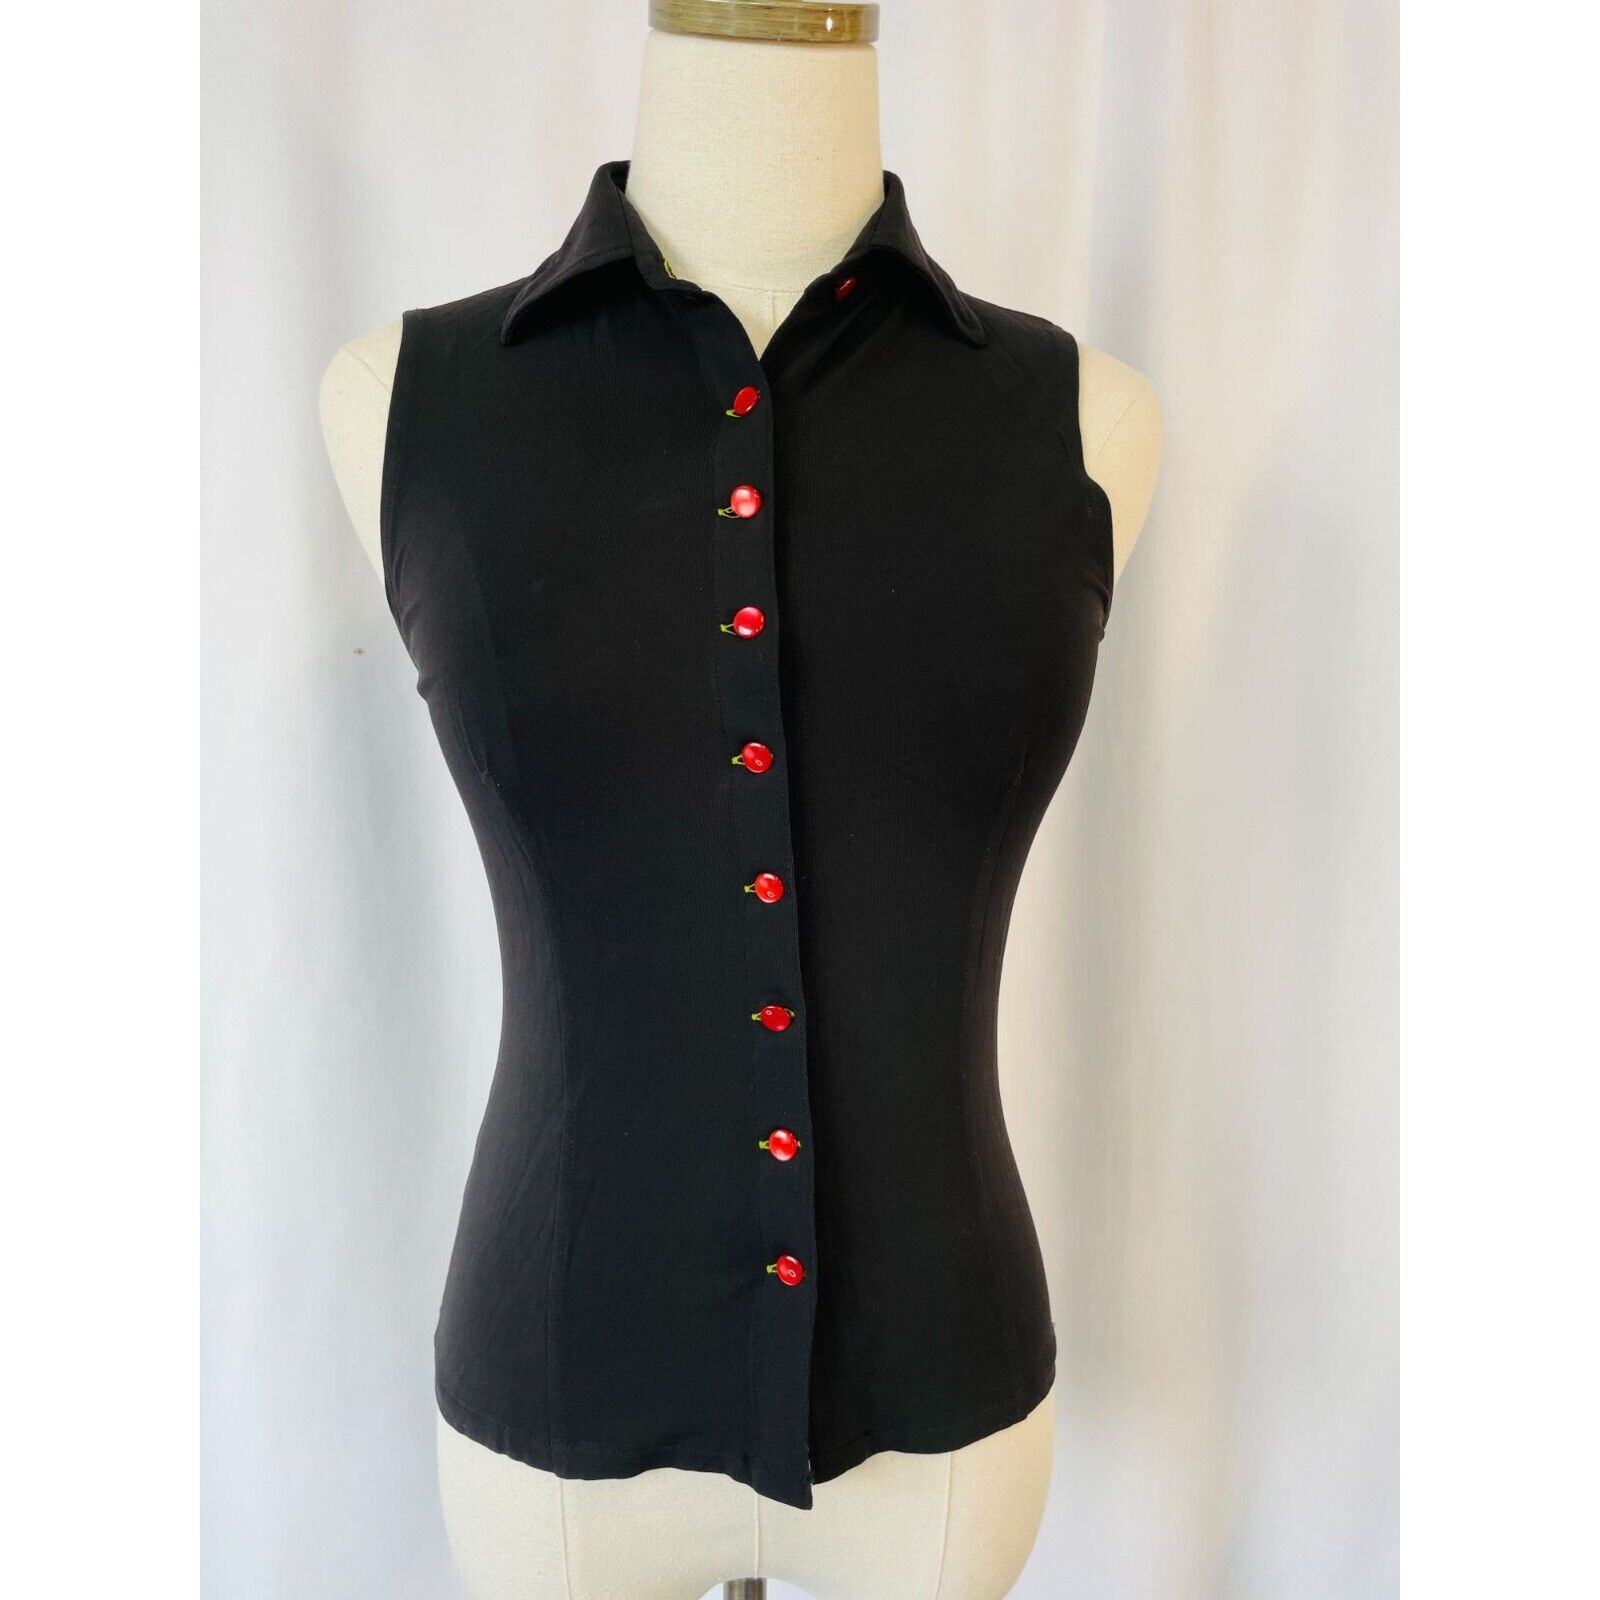 Moschino Mare Vintage Made in Italy Sleeveless Button Down Shirt Sz M